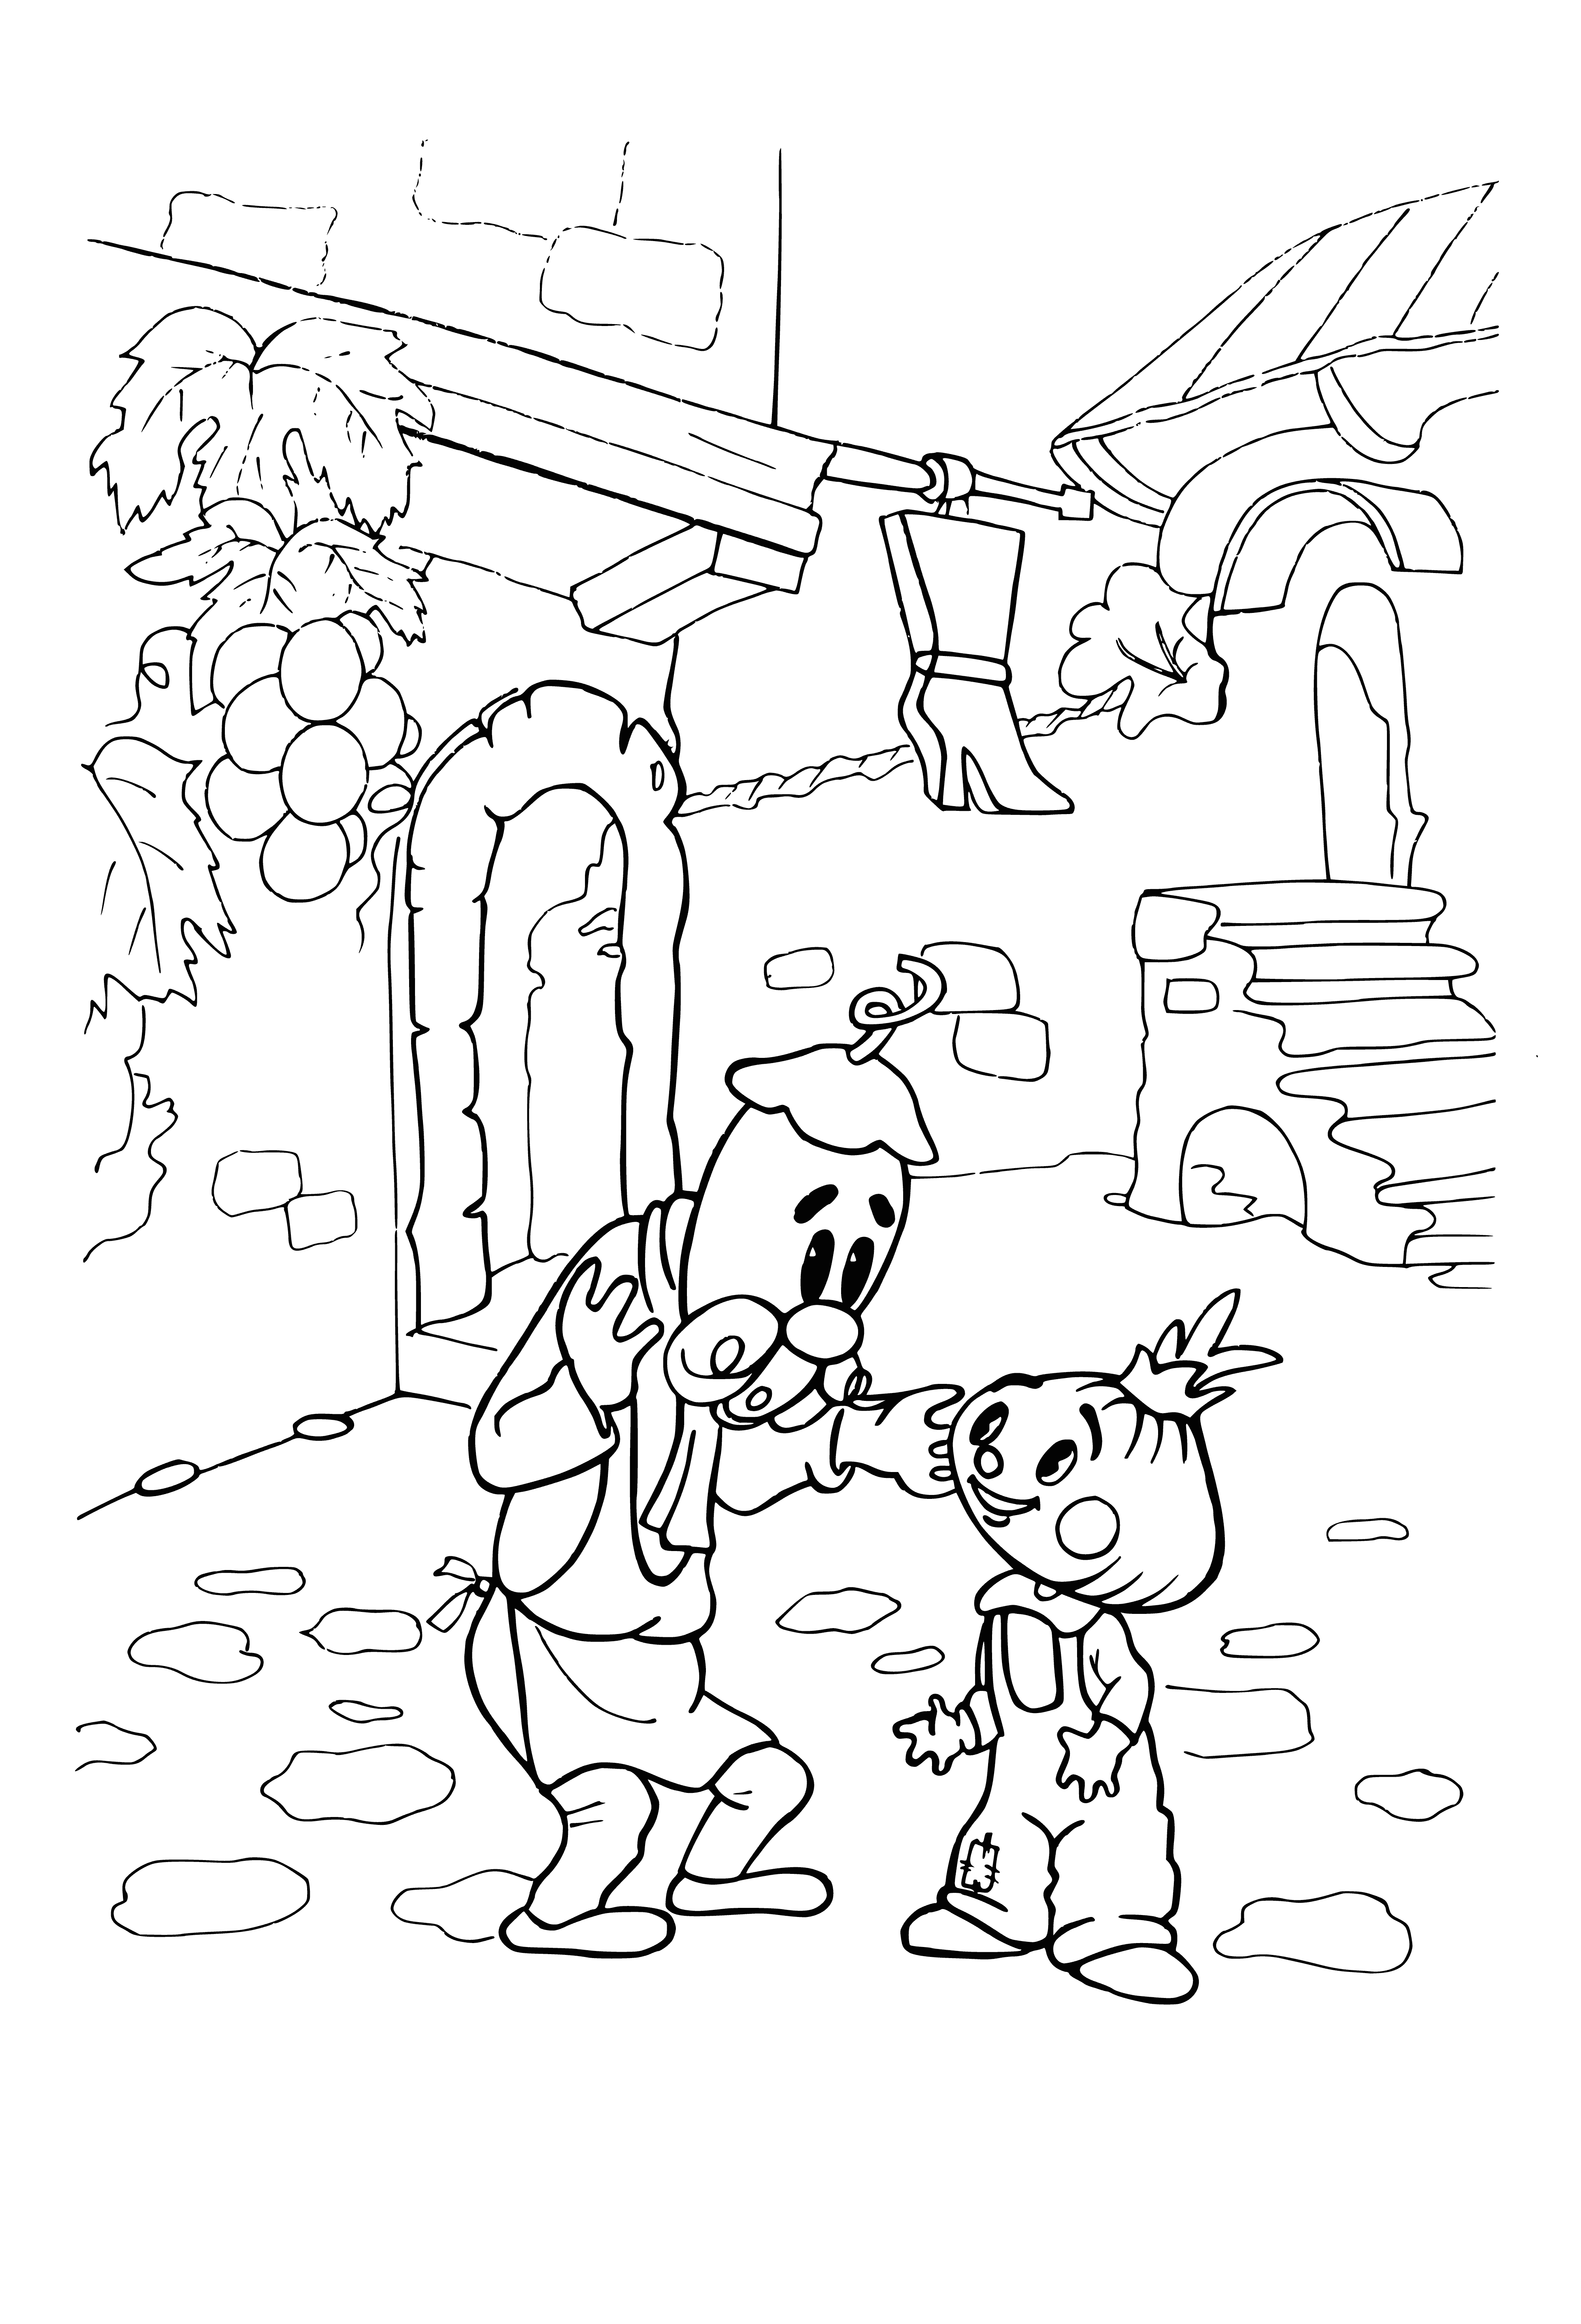 coloring page: Cartoon figure of man wearing red & white stripes, brown mustache & hat, standing on stool, working on large machine, piles of shoes on floor.